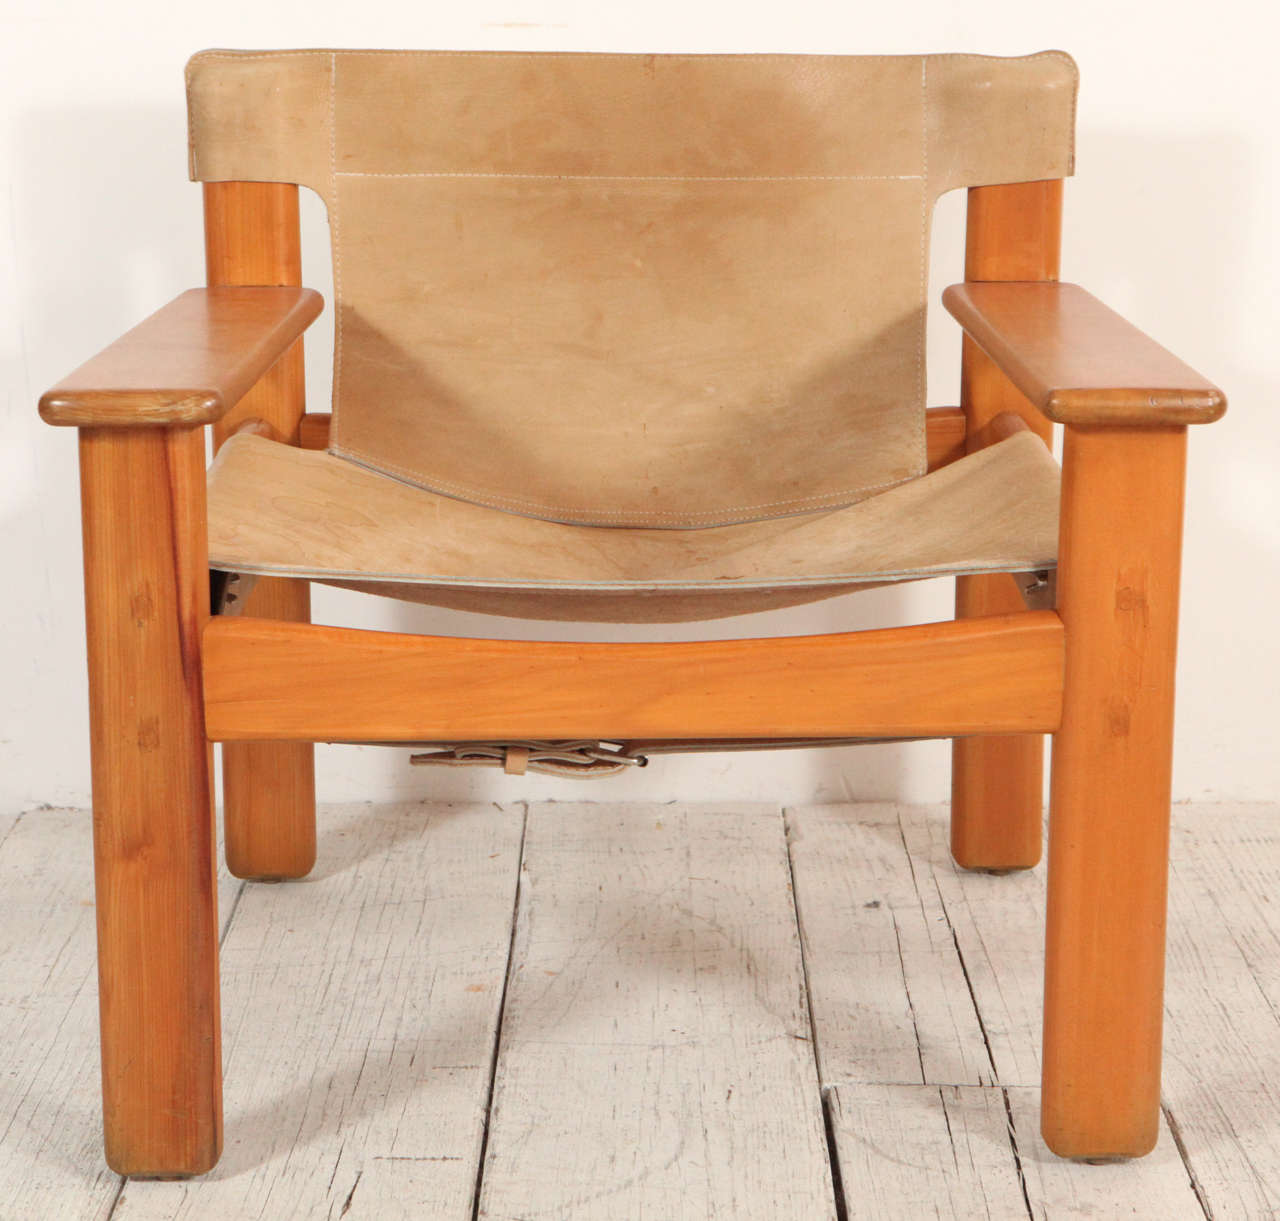 Cream leather sling Spanish style chair in the style of Børge Mogensen.